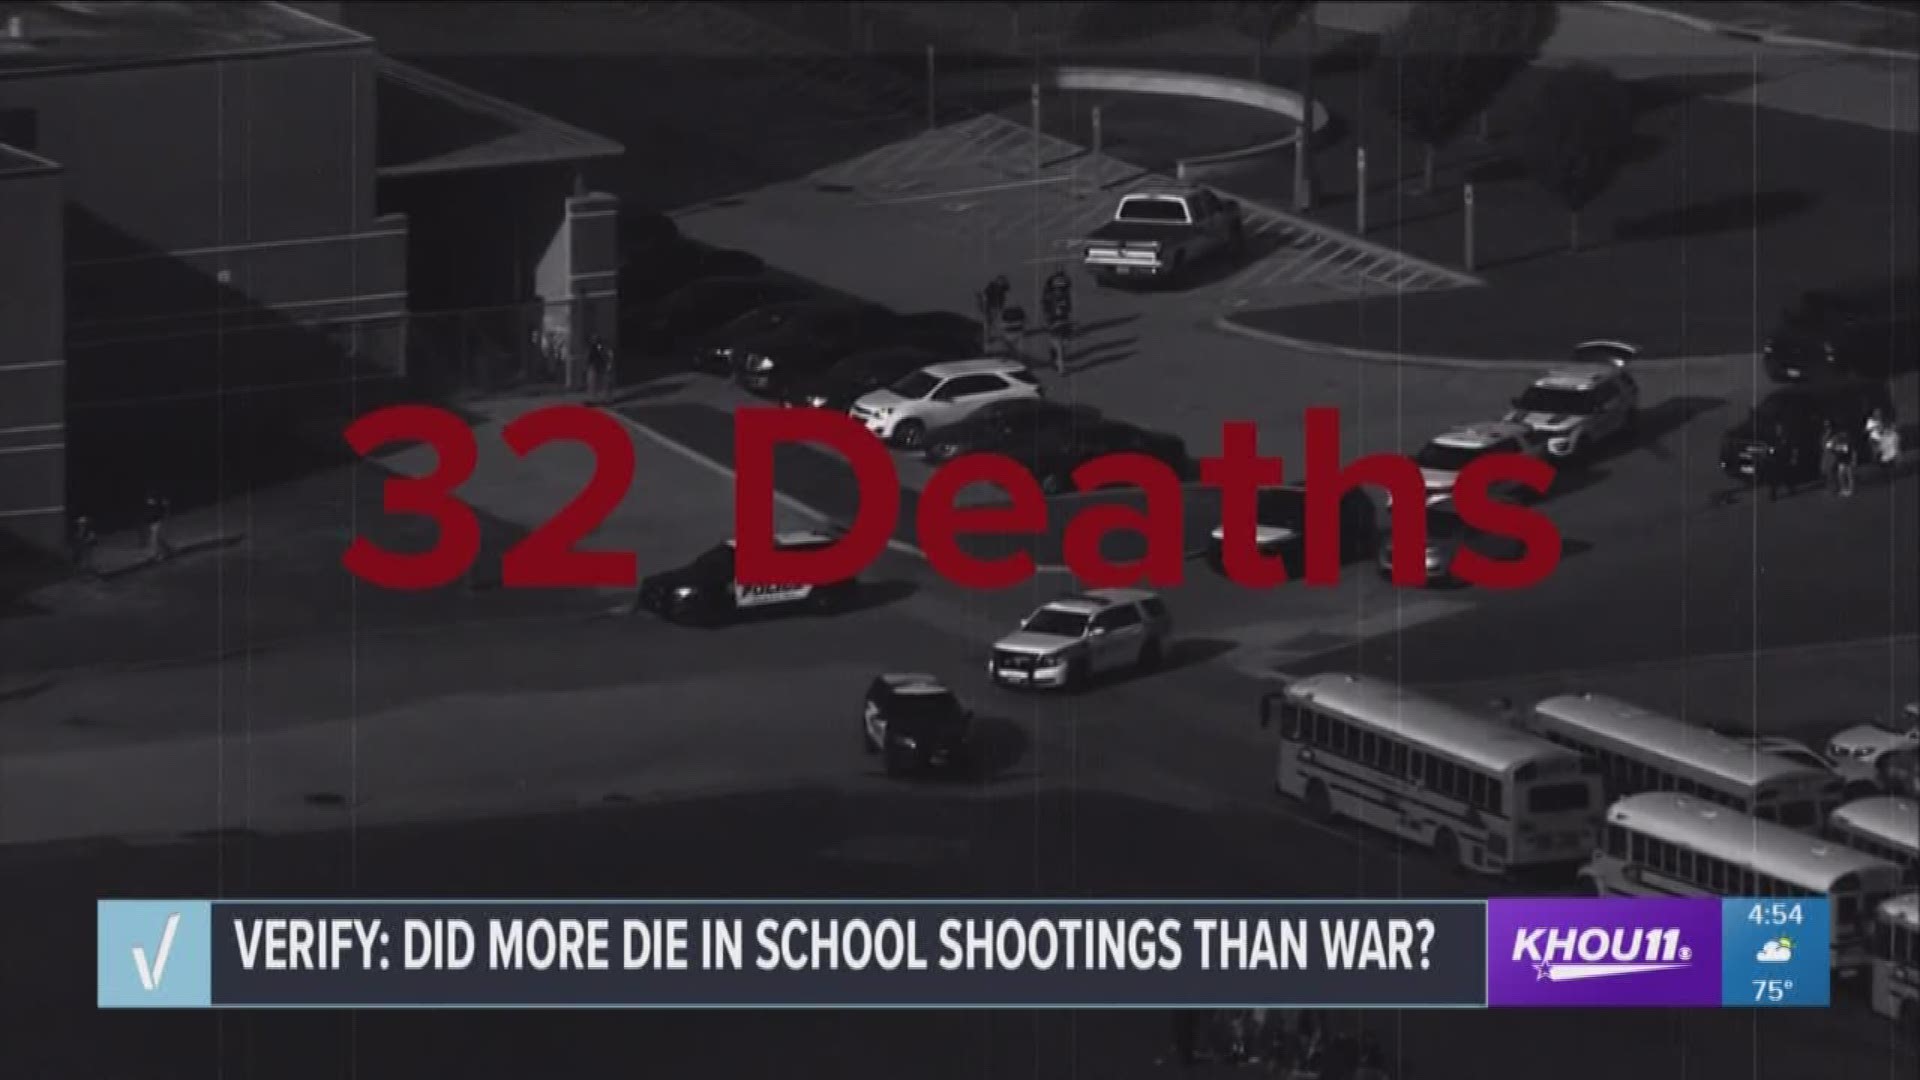 The KHOU 11 Verify team sorts out a claim made by the Washington Post that 2018 has been deadlier for school children than military service members. 